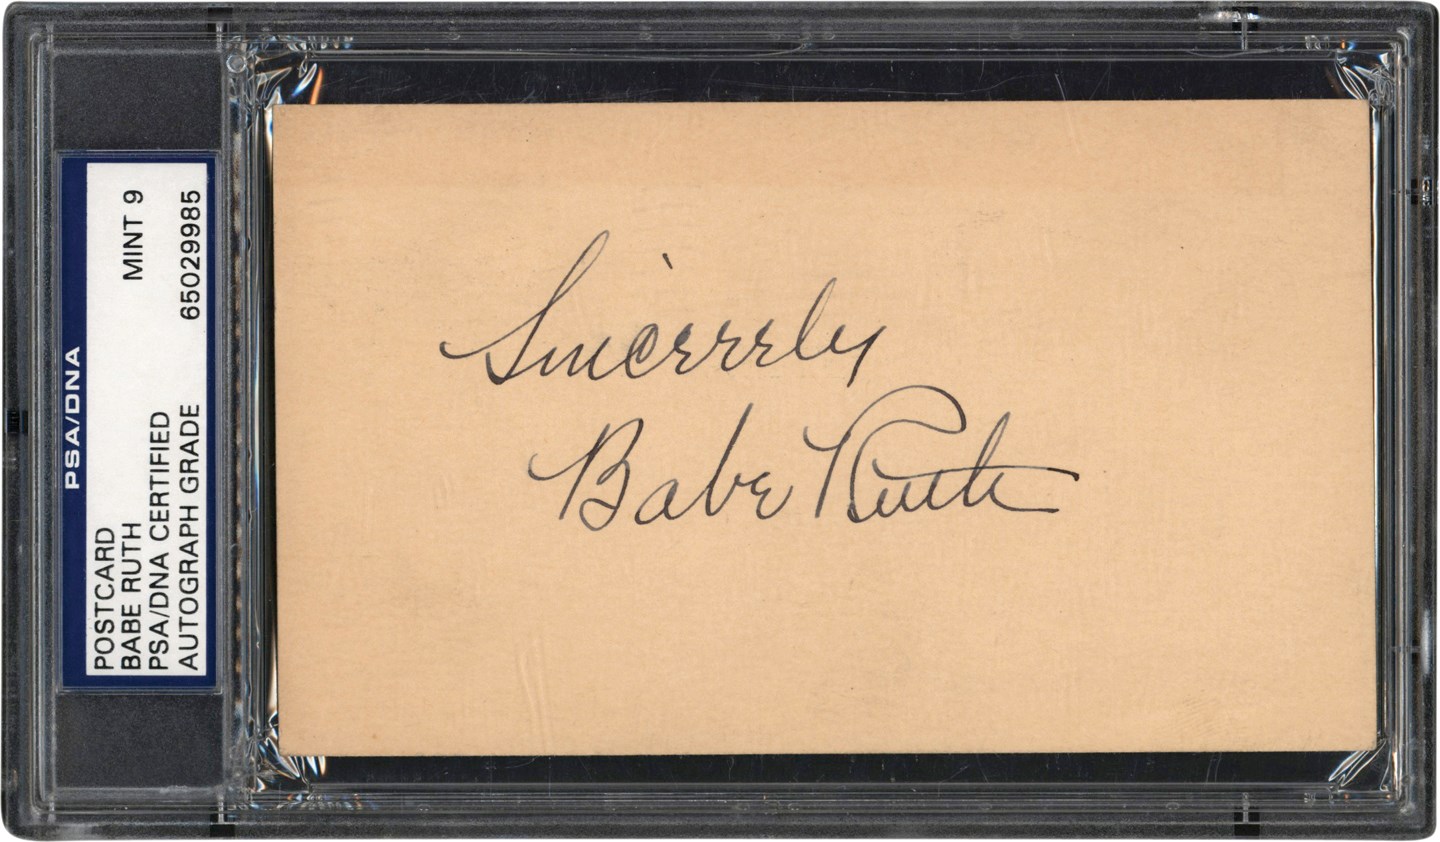 Ruth and Gehrig - 1937 Babe Ruth Signed Government Postcard (PSA MINT 9)